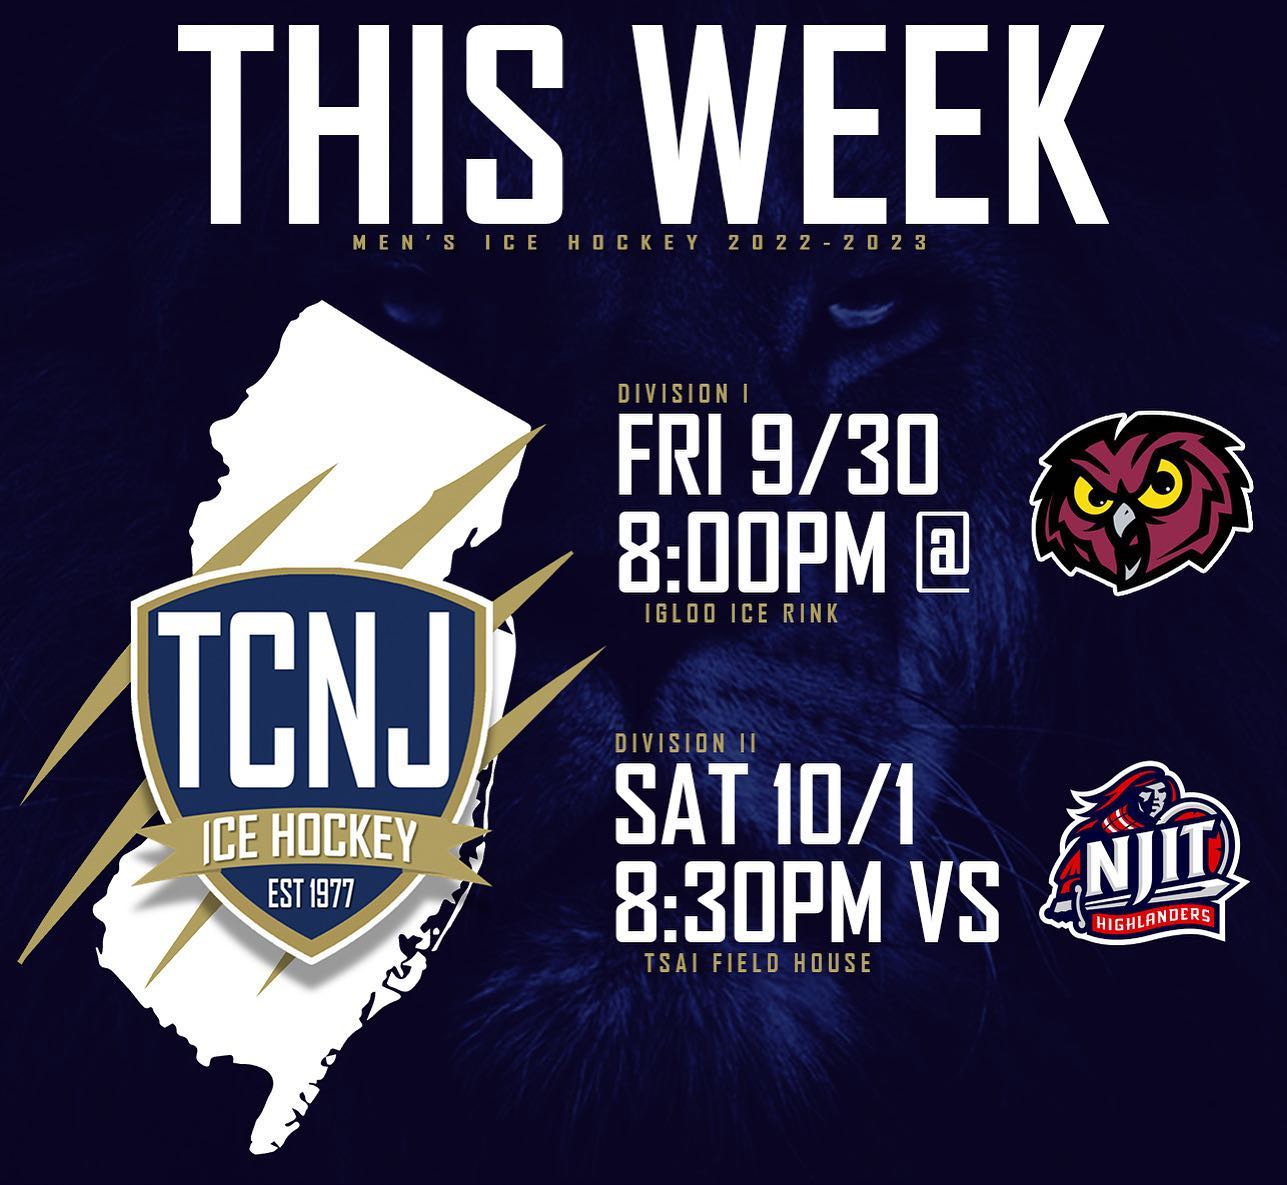 THIS WEEK. The D1 TCNJ Lions go to the Igloo to face Temple University Friday night, while our D2 team is home in Lawrenceville against NJIT on Saturday night